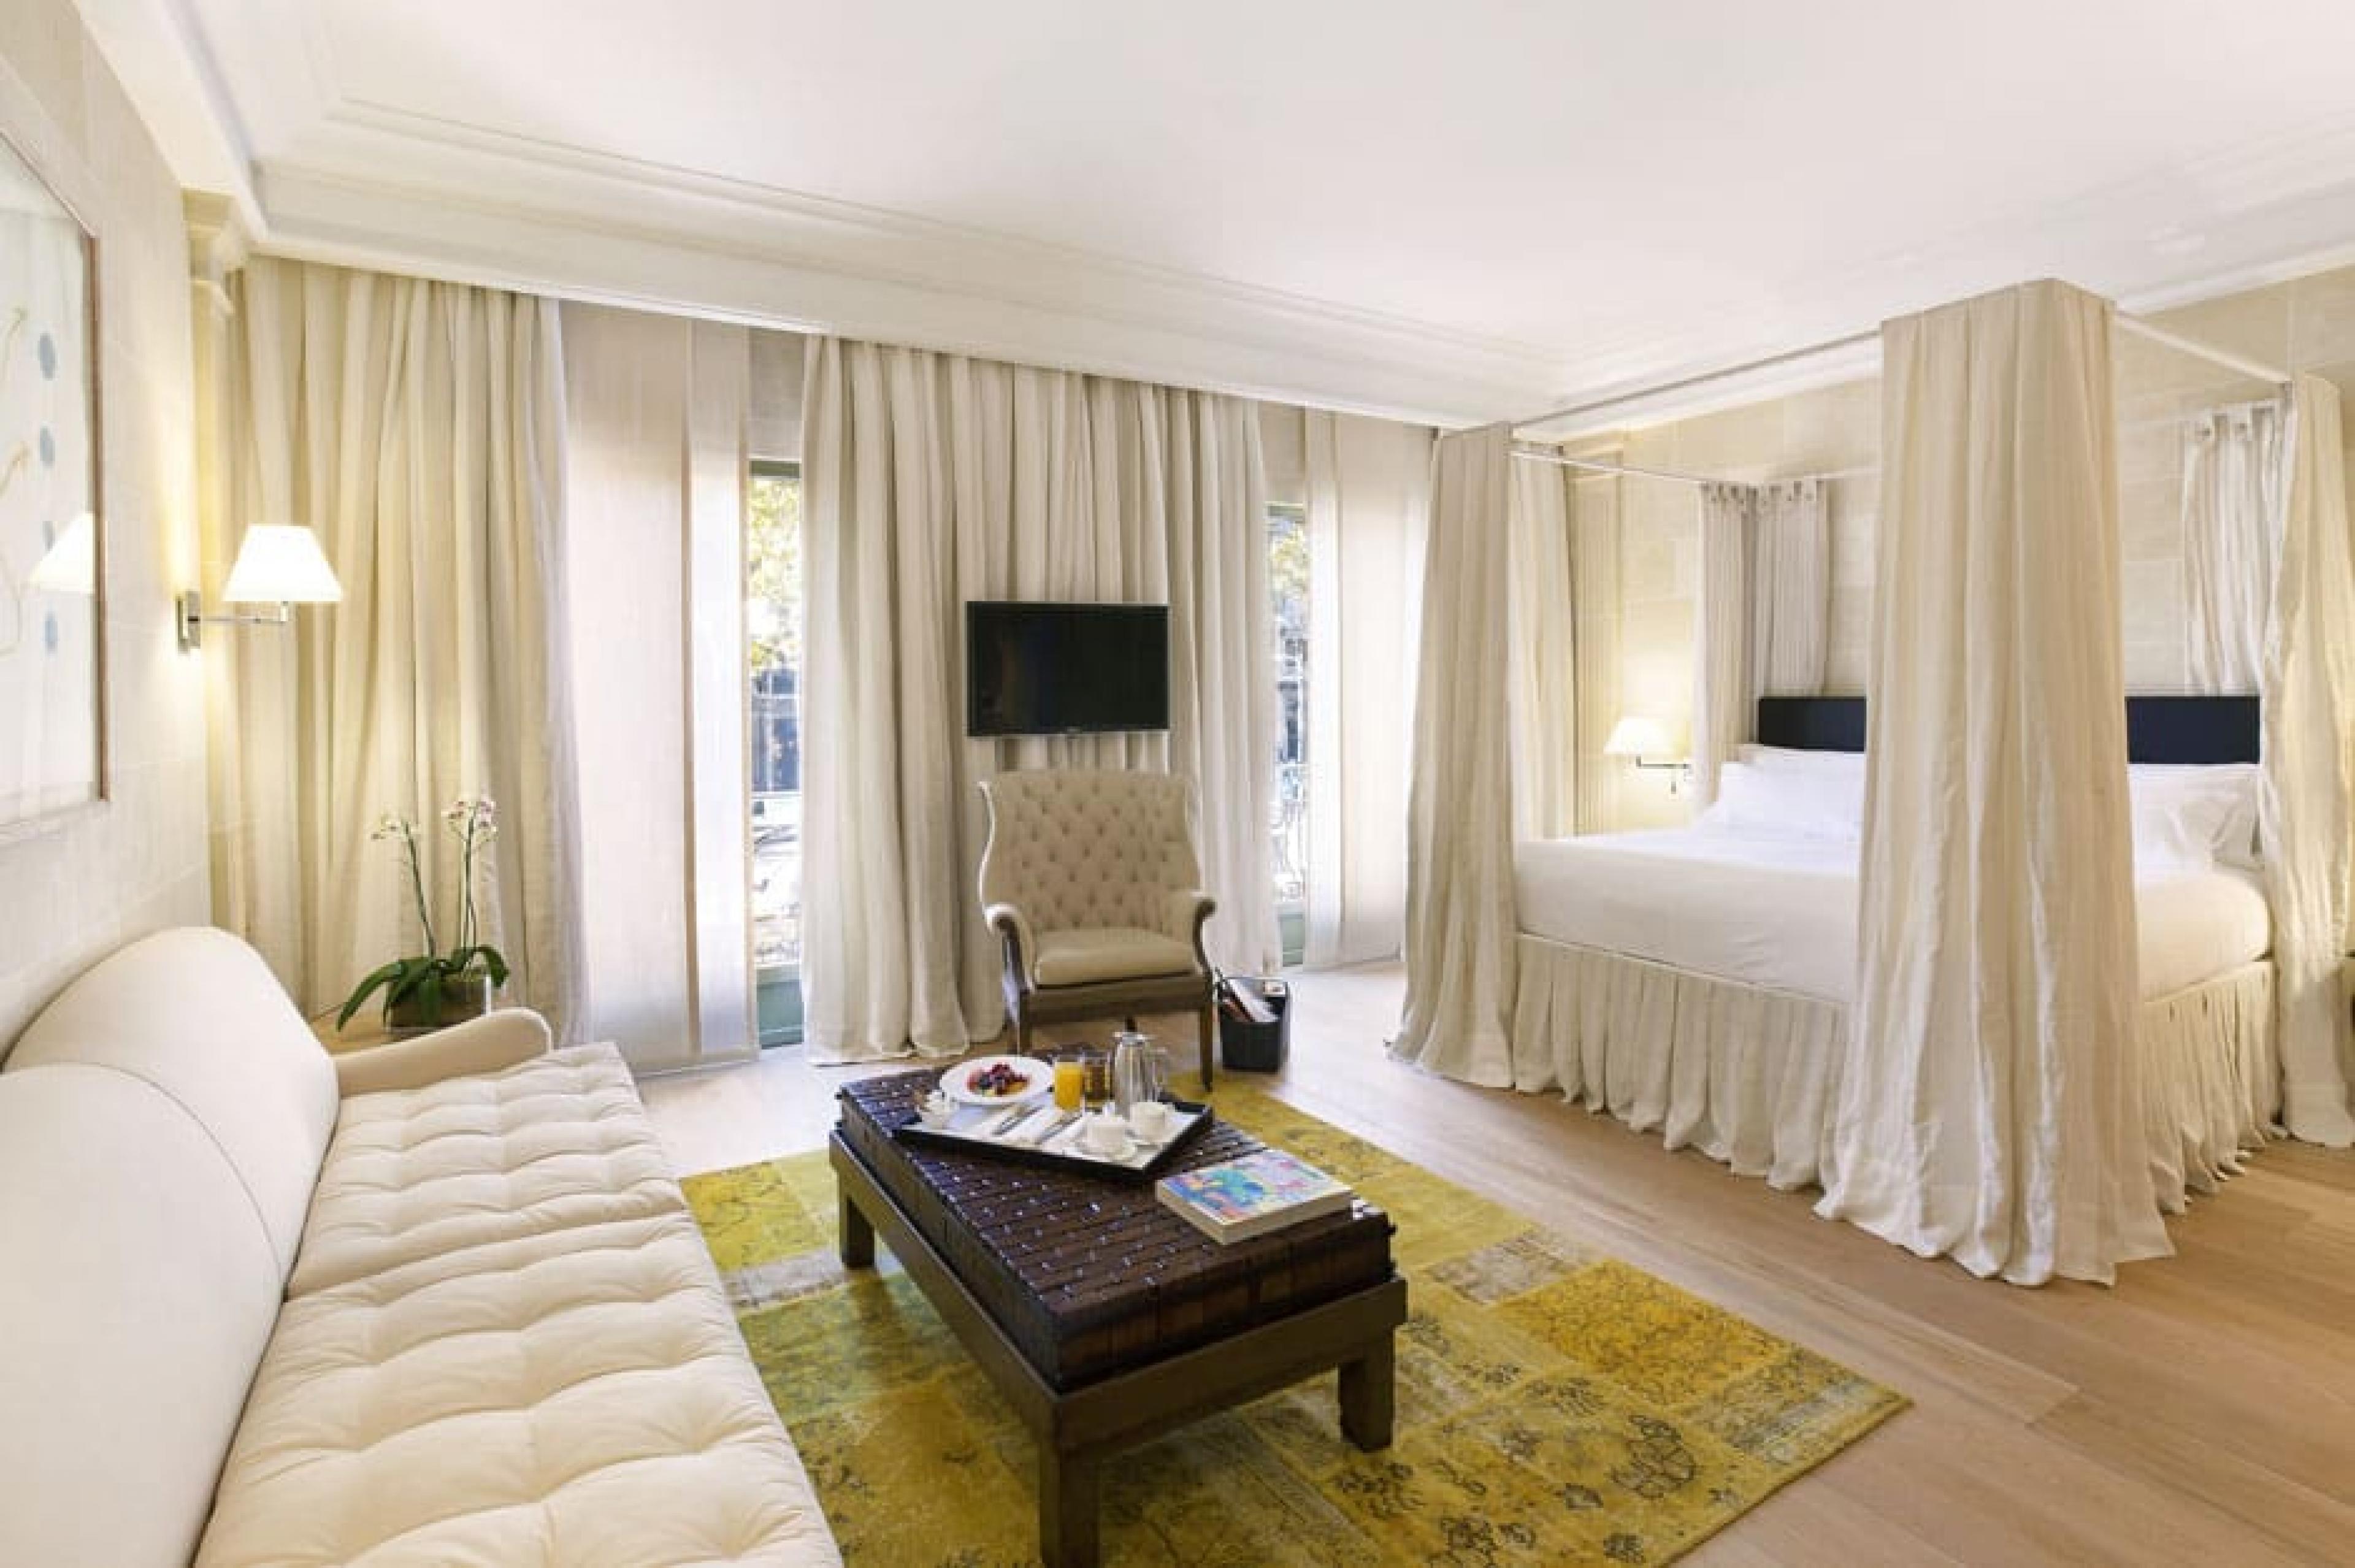  Suite at Majestic Hotel & Spa, Barcelona, Spain